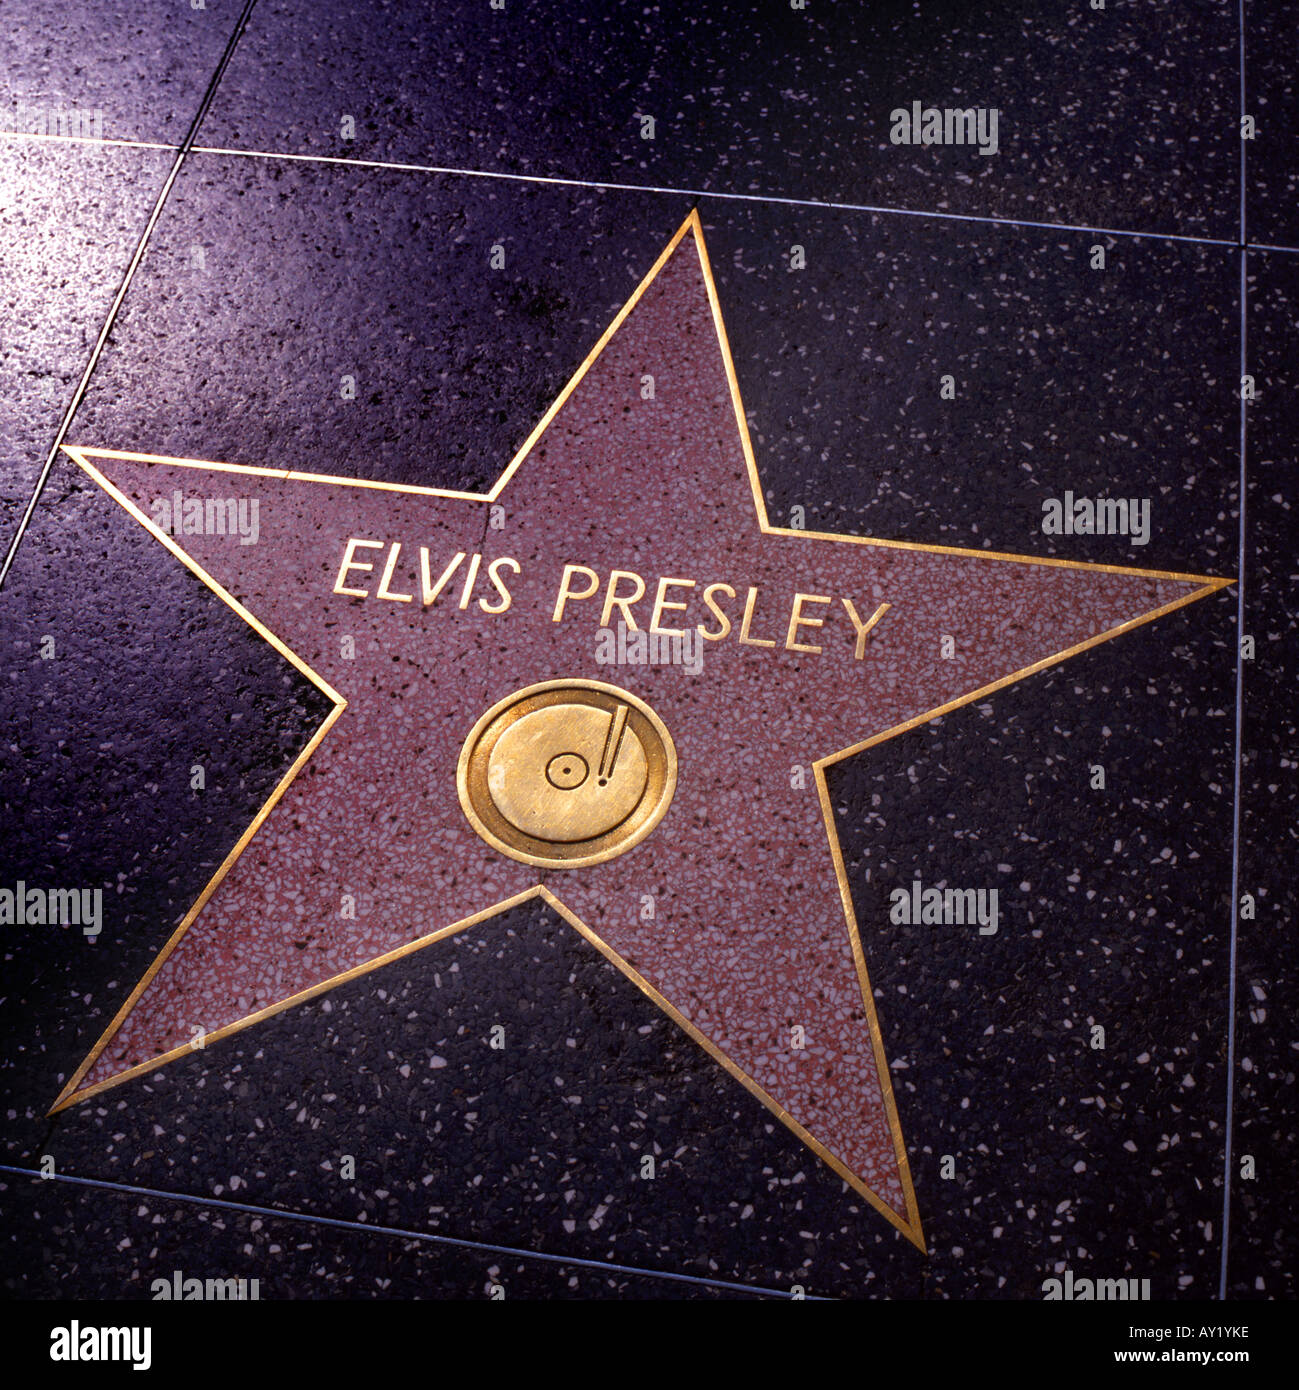 Elvis Presley’s Star on the Hollywood Walk of Fame Stock Photo